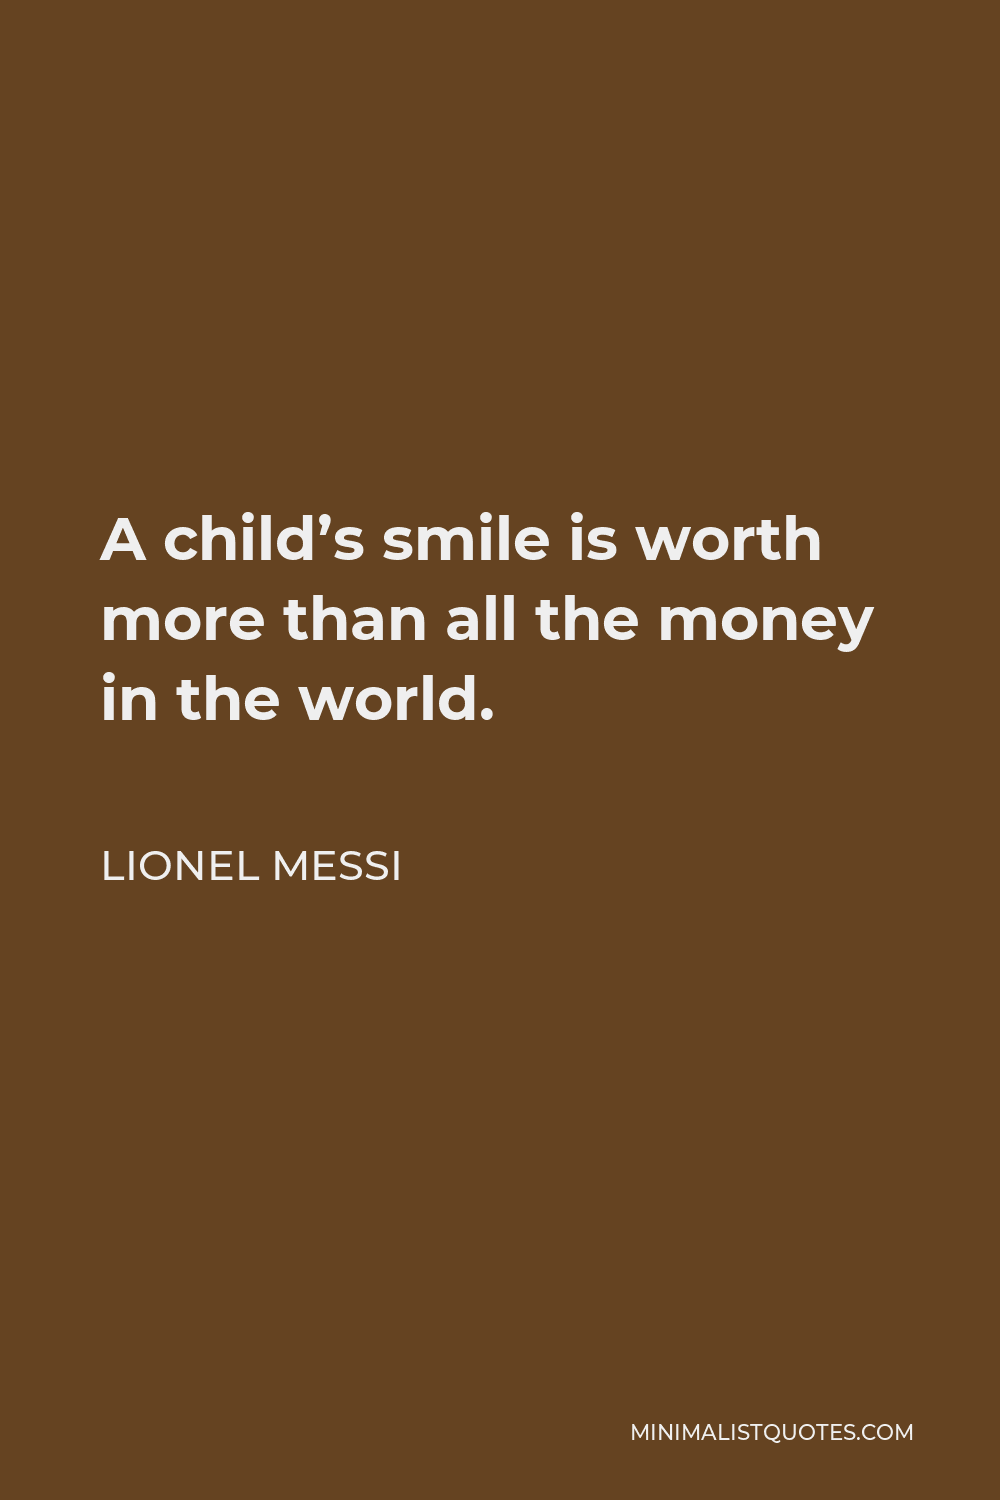 Lionel Messi Quote - A child’s smile is worth more than all the money in the world.